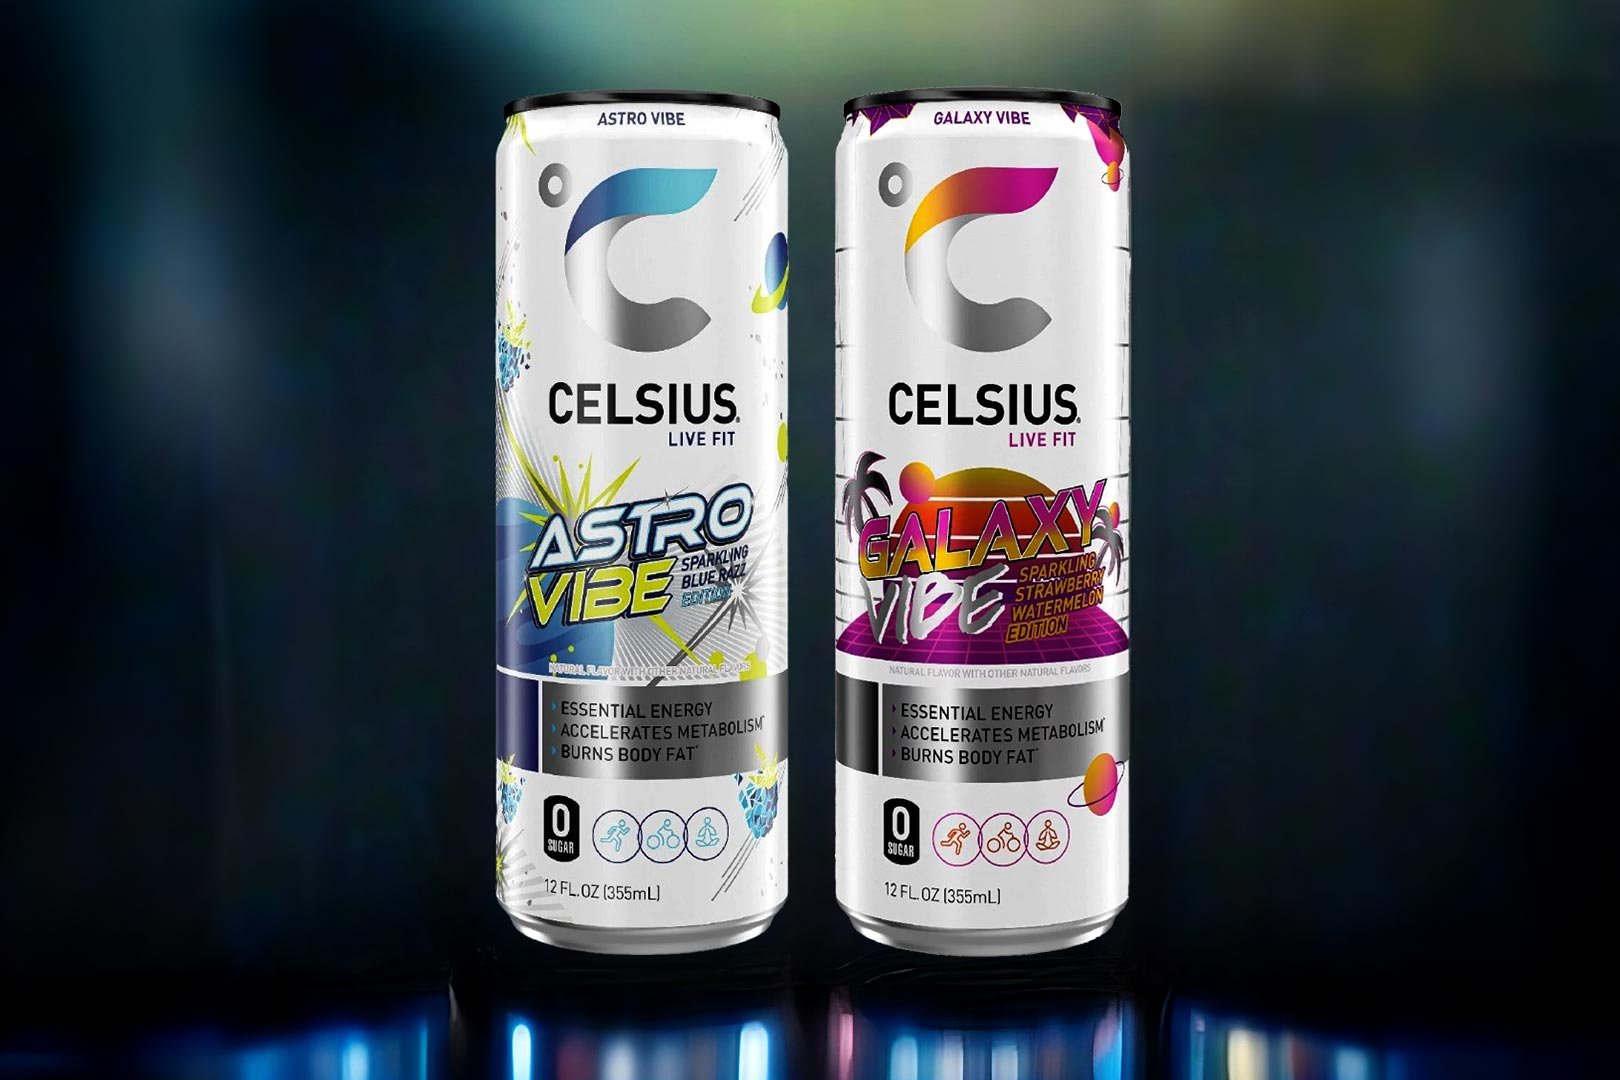 Celsius Galaxy Vibe And Celsius Astro Vibe